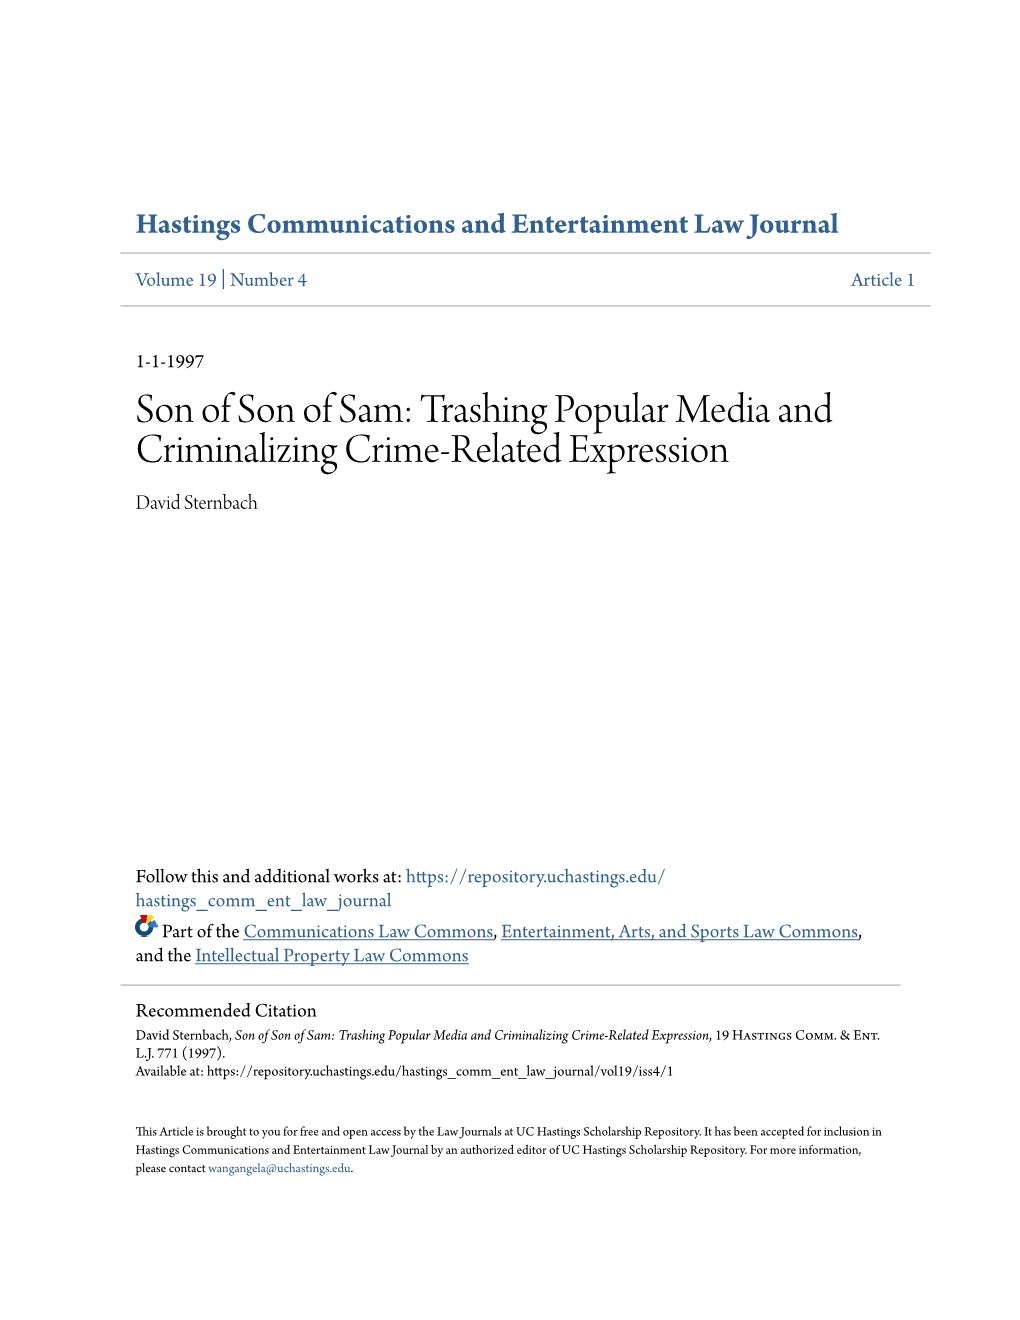 Son of Son of Sam: Trashing Popular Media and Criminalizing Crime-Related Expression David Sternbach